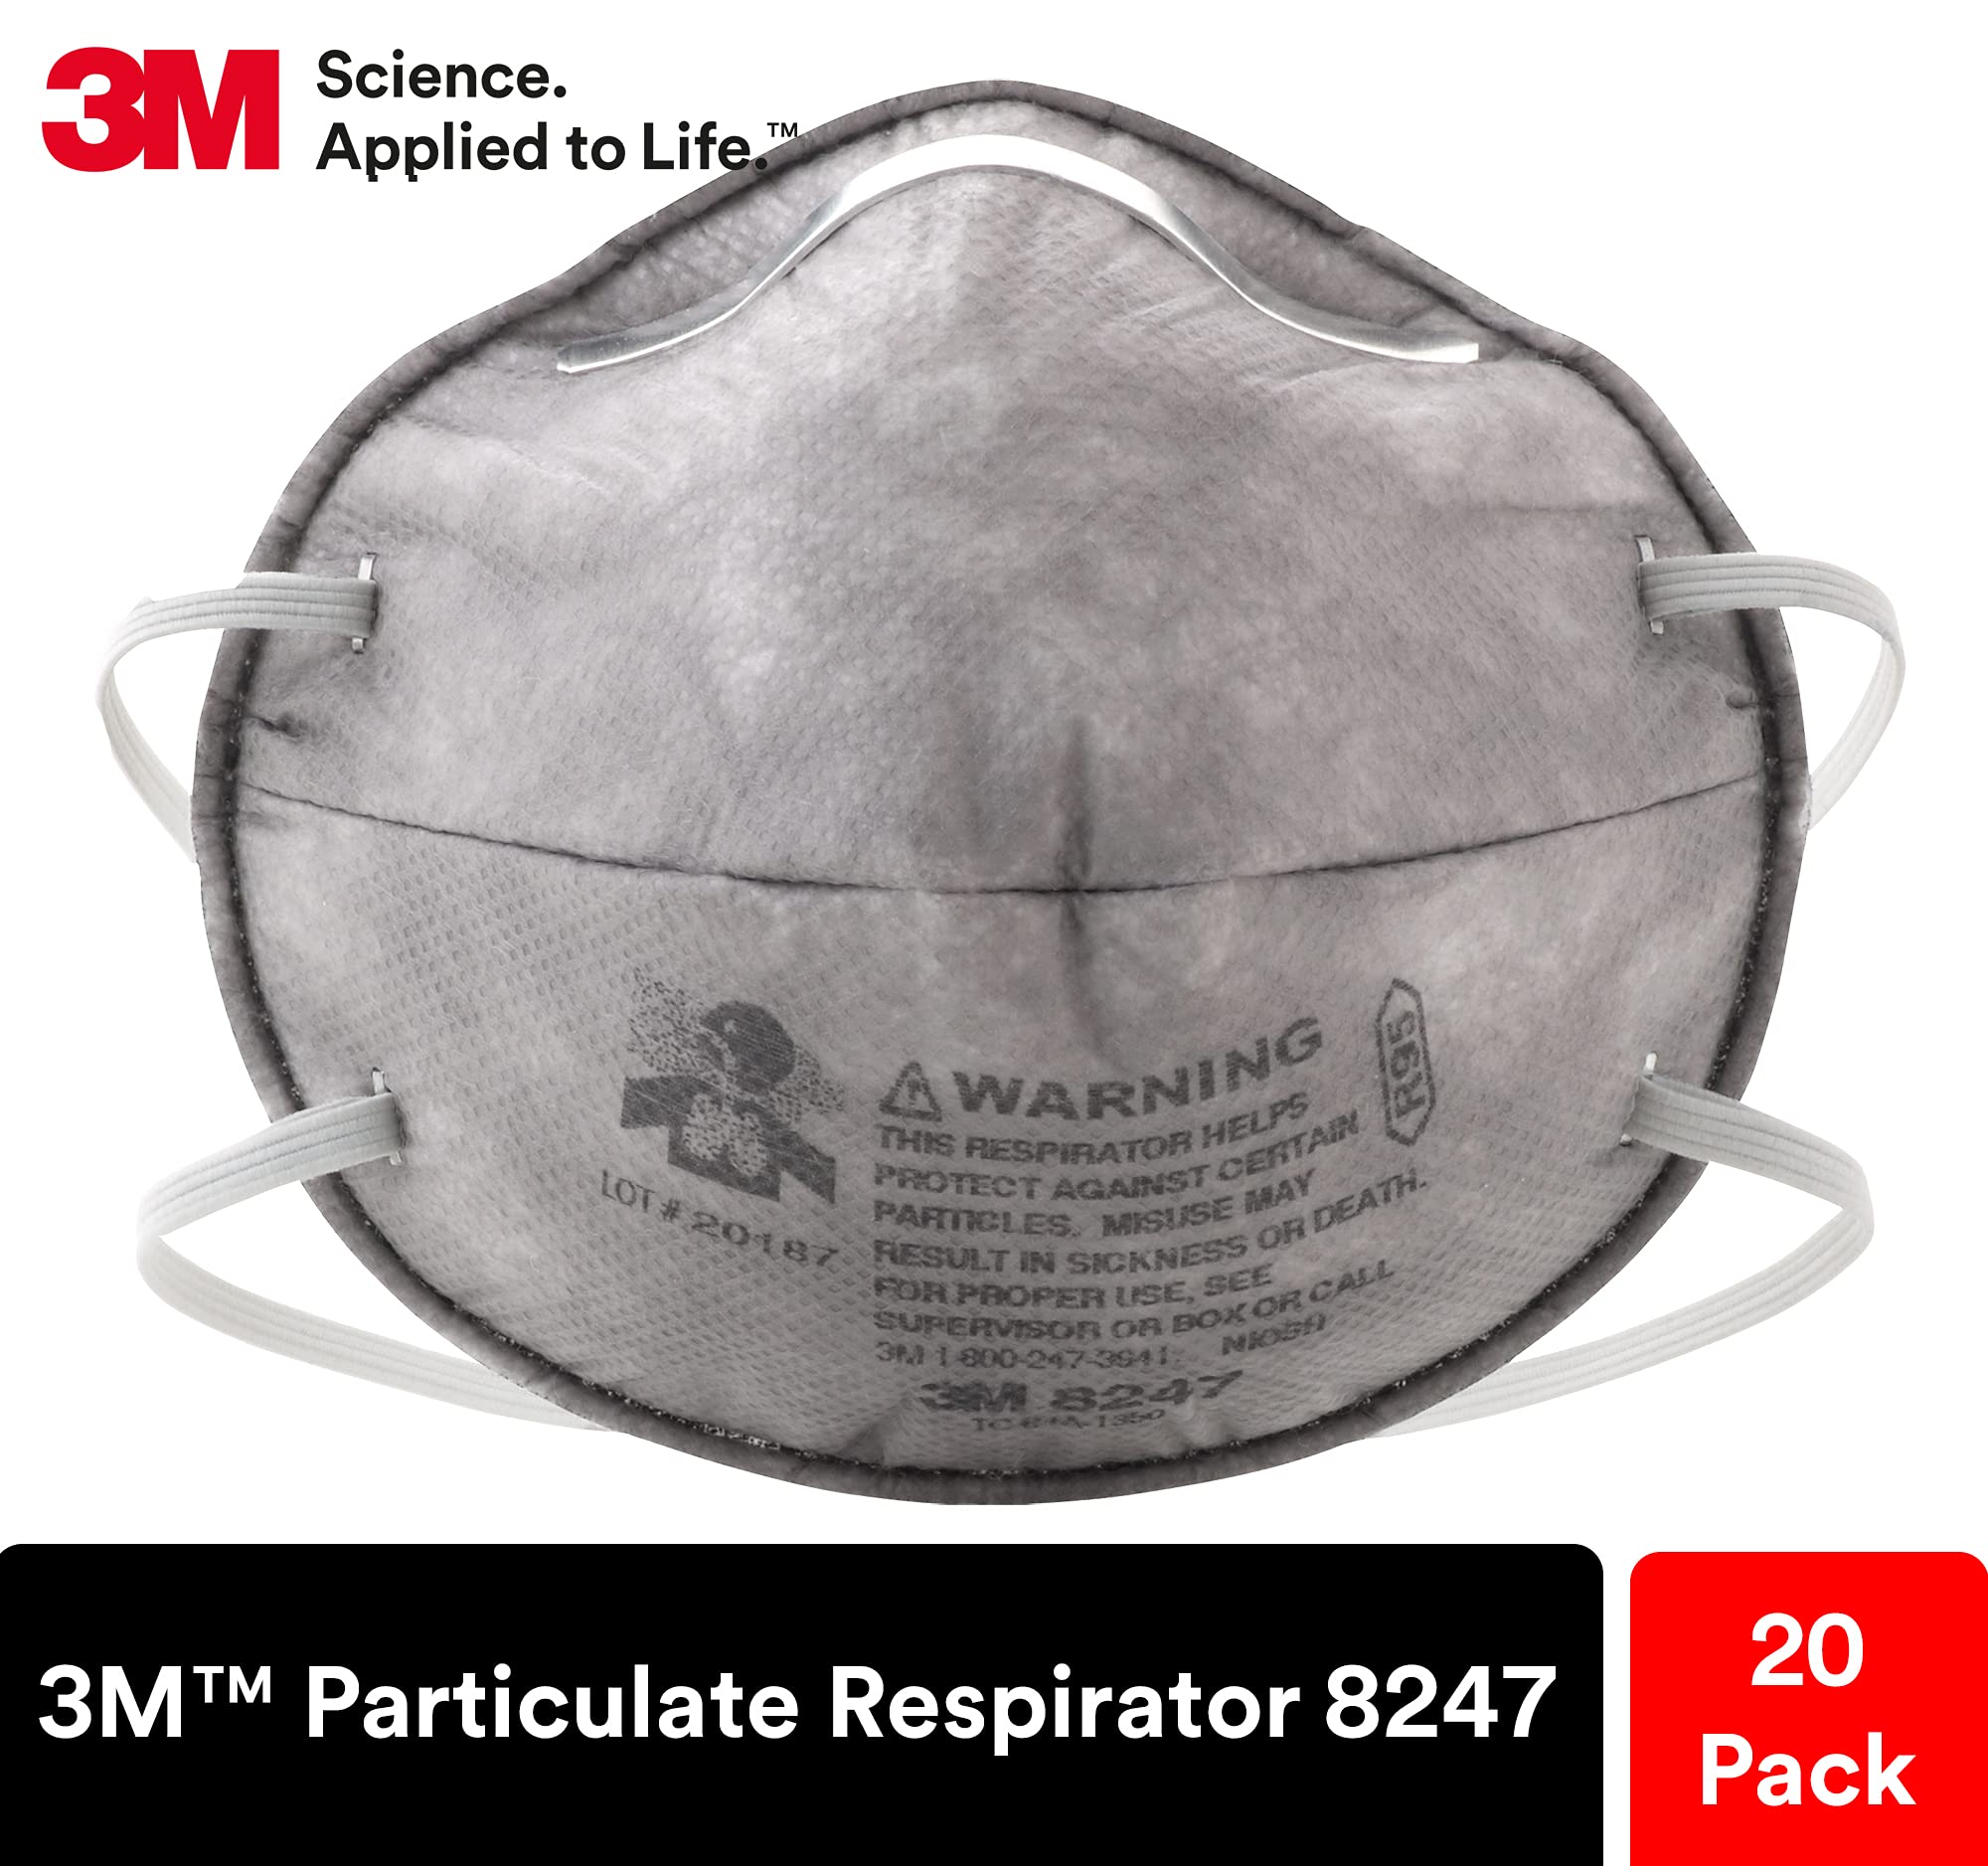 3M Particulate Respirator 8247, Pack of 20, R95, Nuisance Level Organic Vapor Relief, Braided Comfort Strap, Carbon Filter Material, Disposable General Purpose for Dust and other Particles